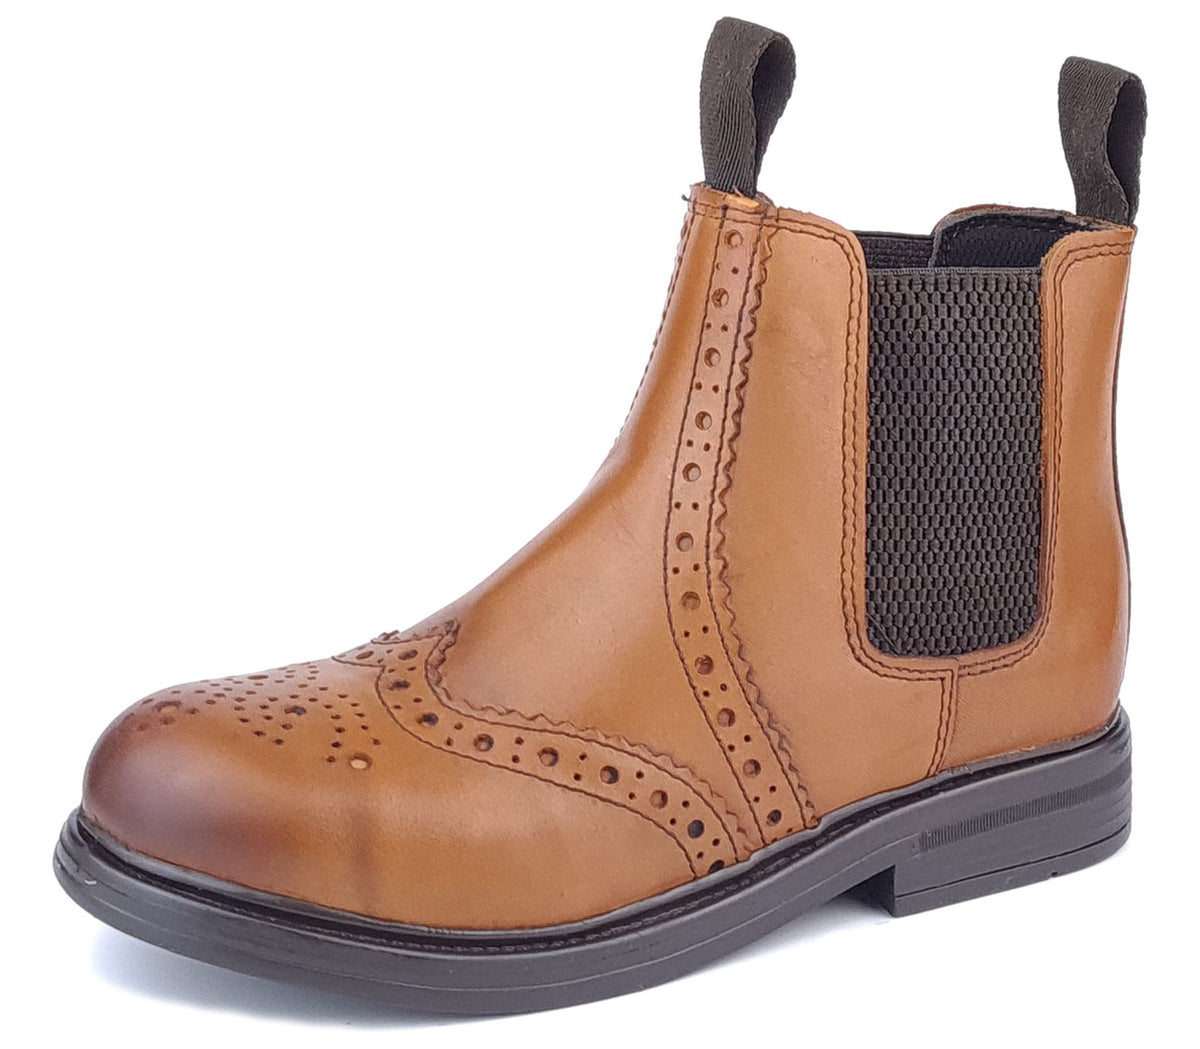 Frank James Wrexham Kids Leather Pull On Brogue Chelsea Boots